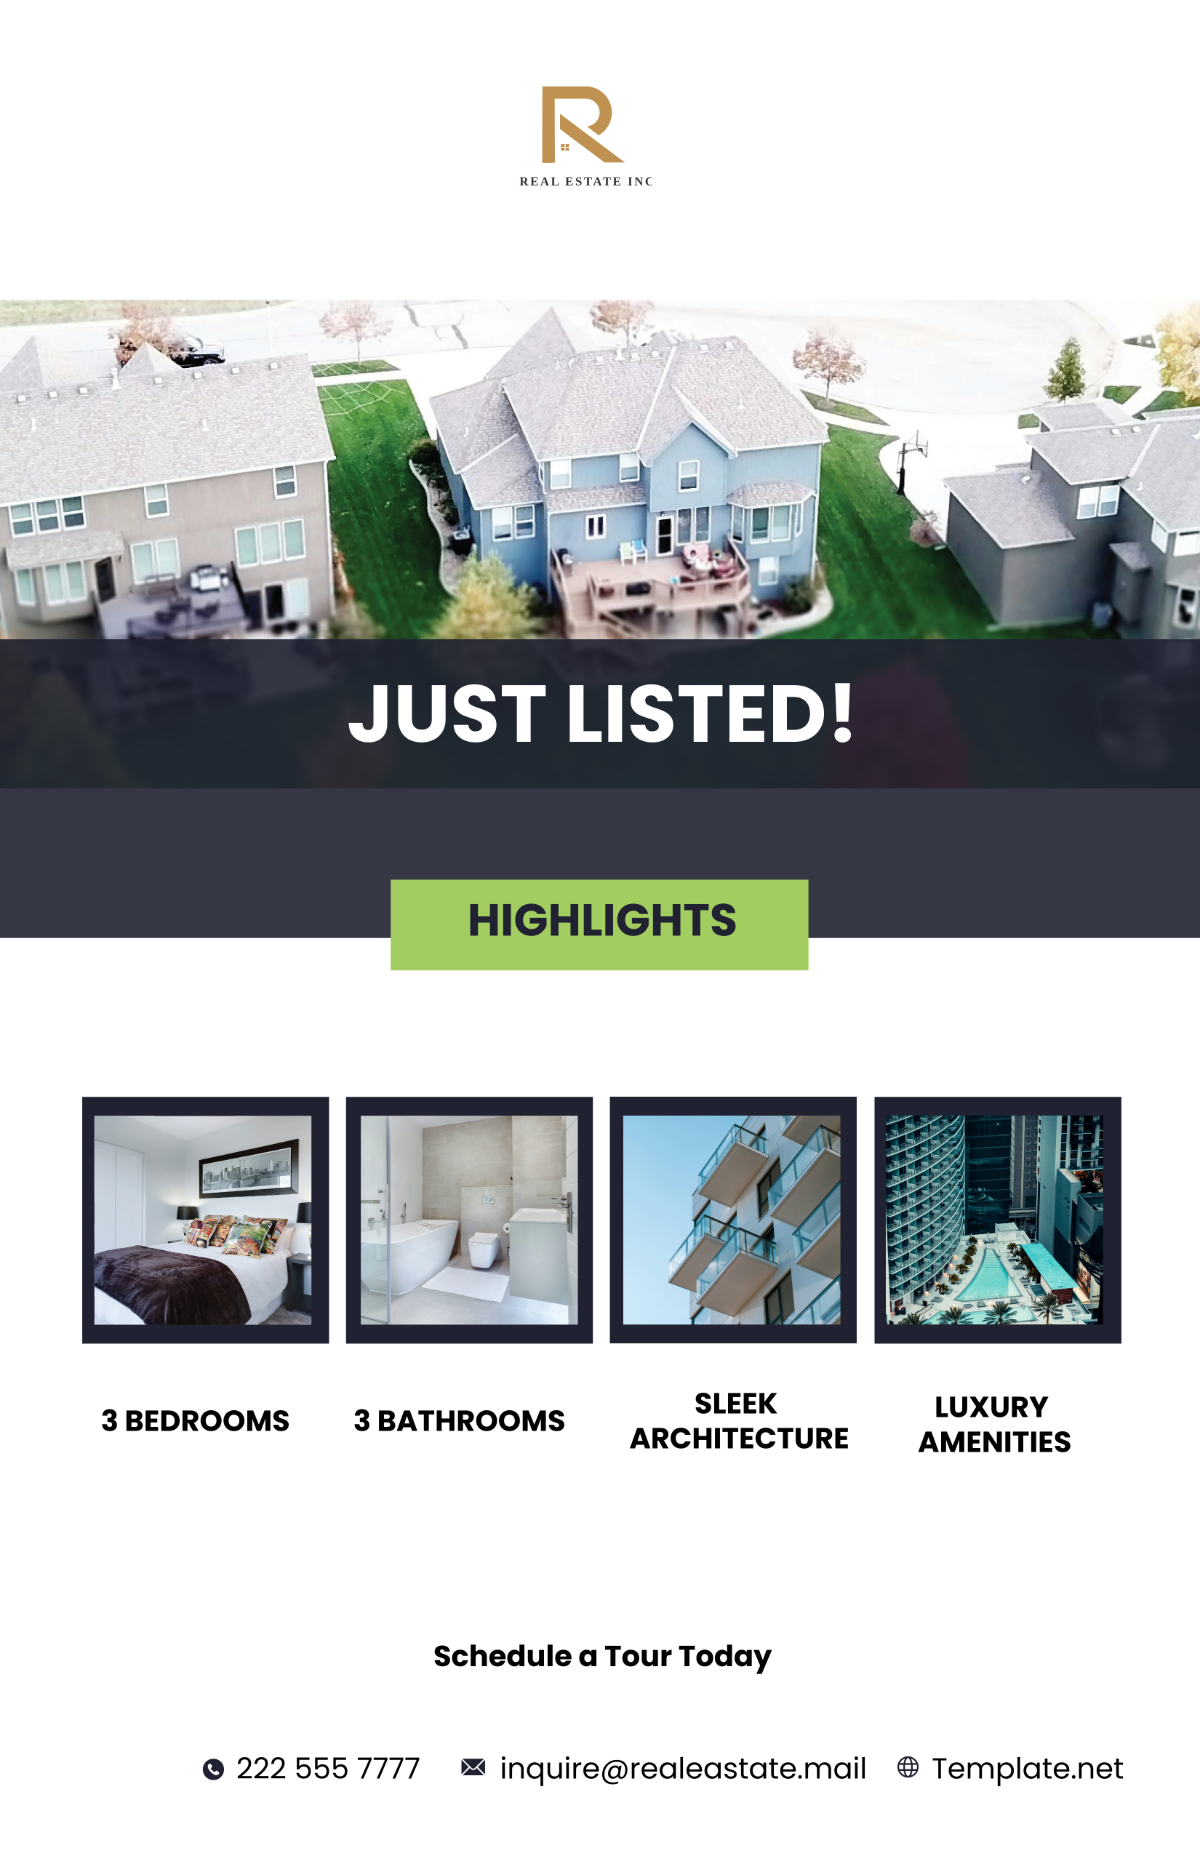 Just Listed Property Poster Template